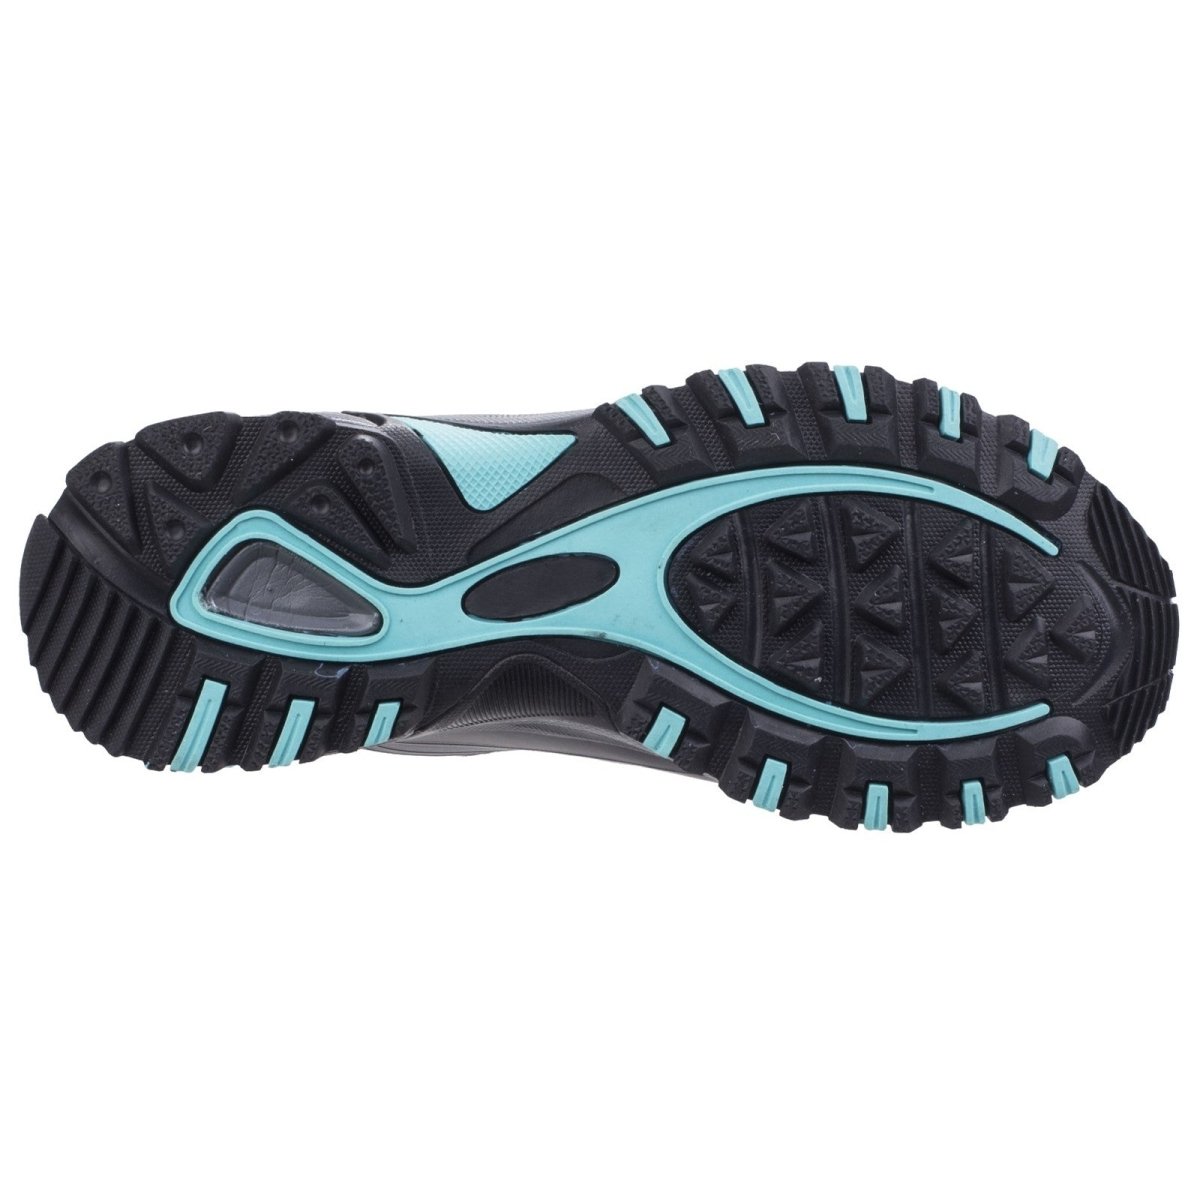 Cotswold Abbeydale Low Ladies Walking Hiking Shoes - Shoe Store Direct